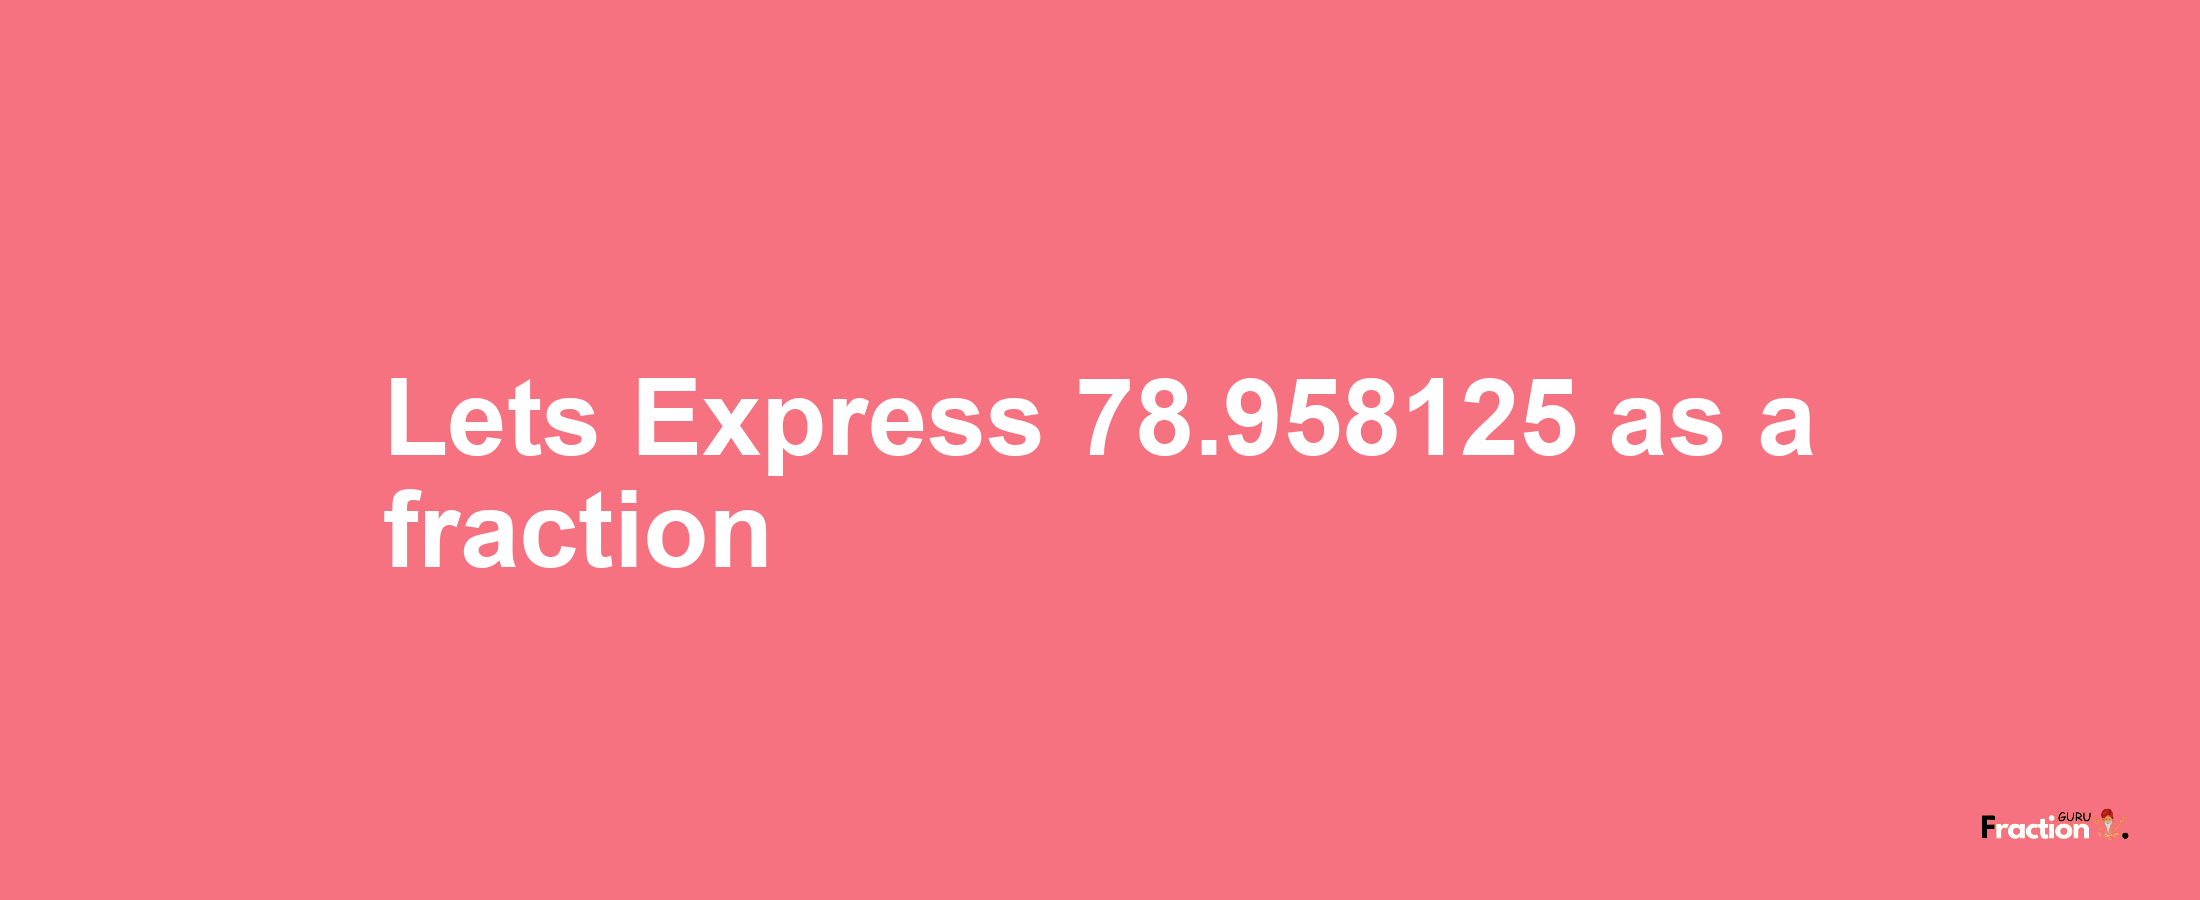 Lets Express 78.958125 as afraction